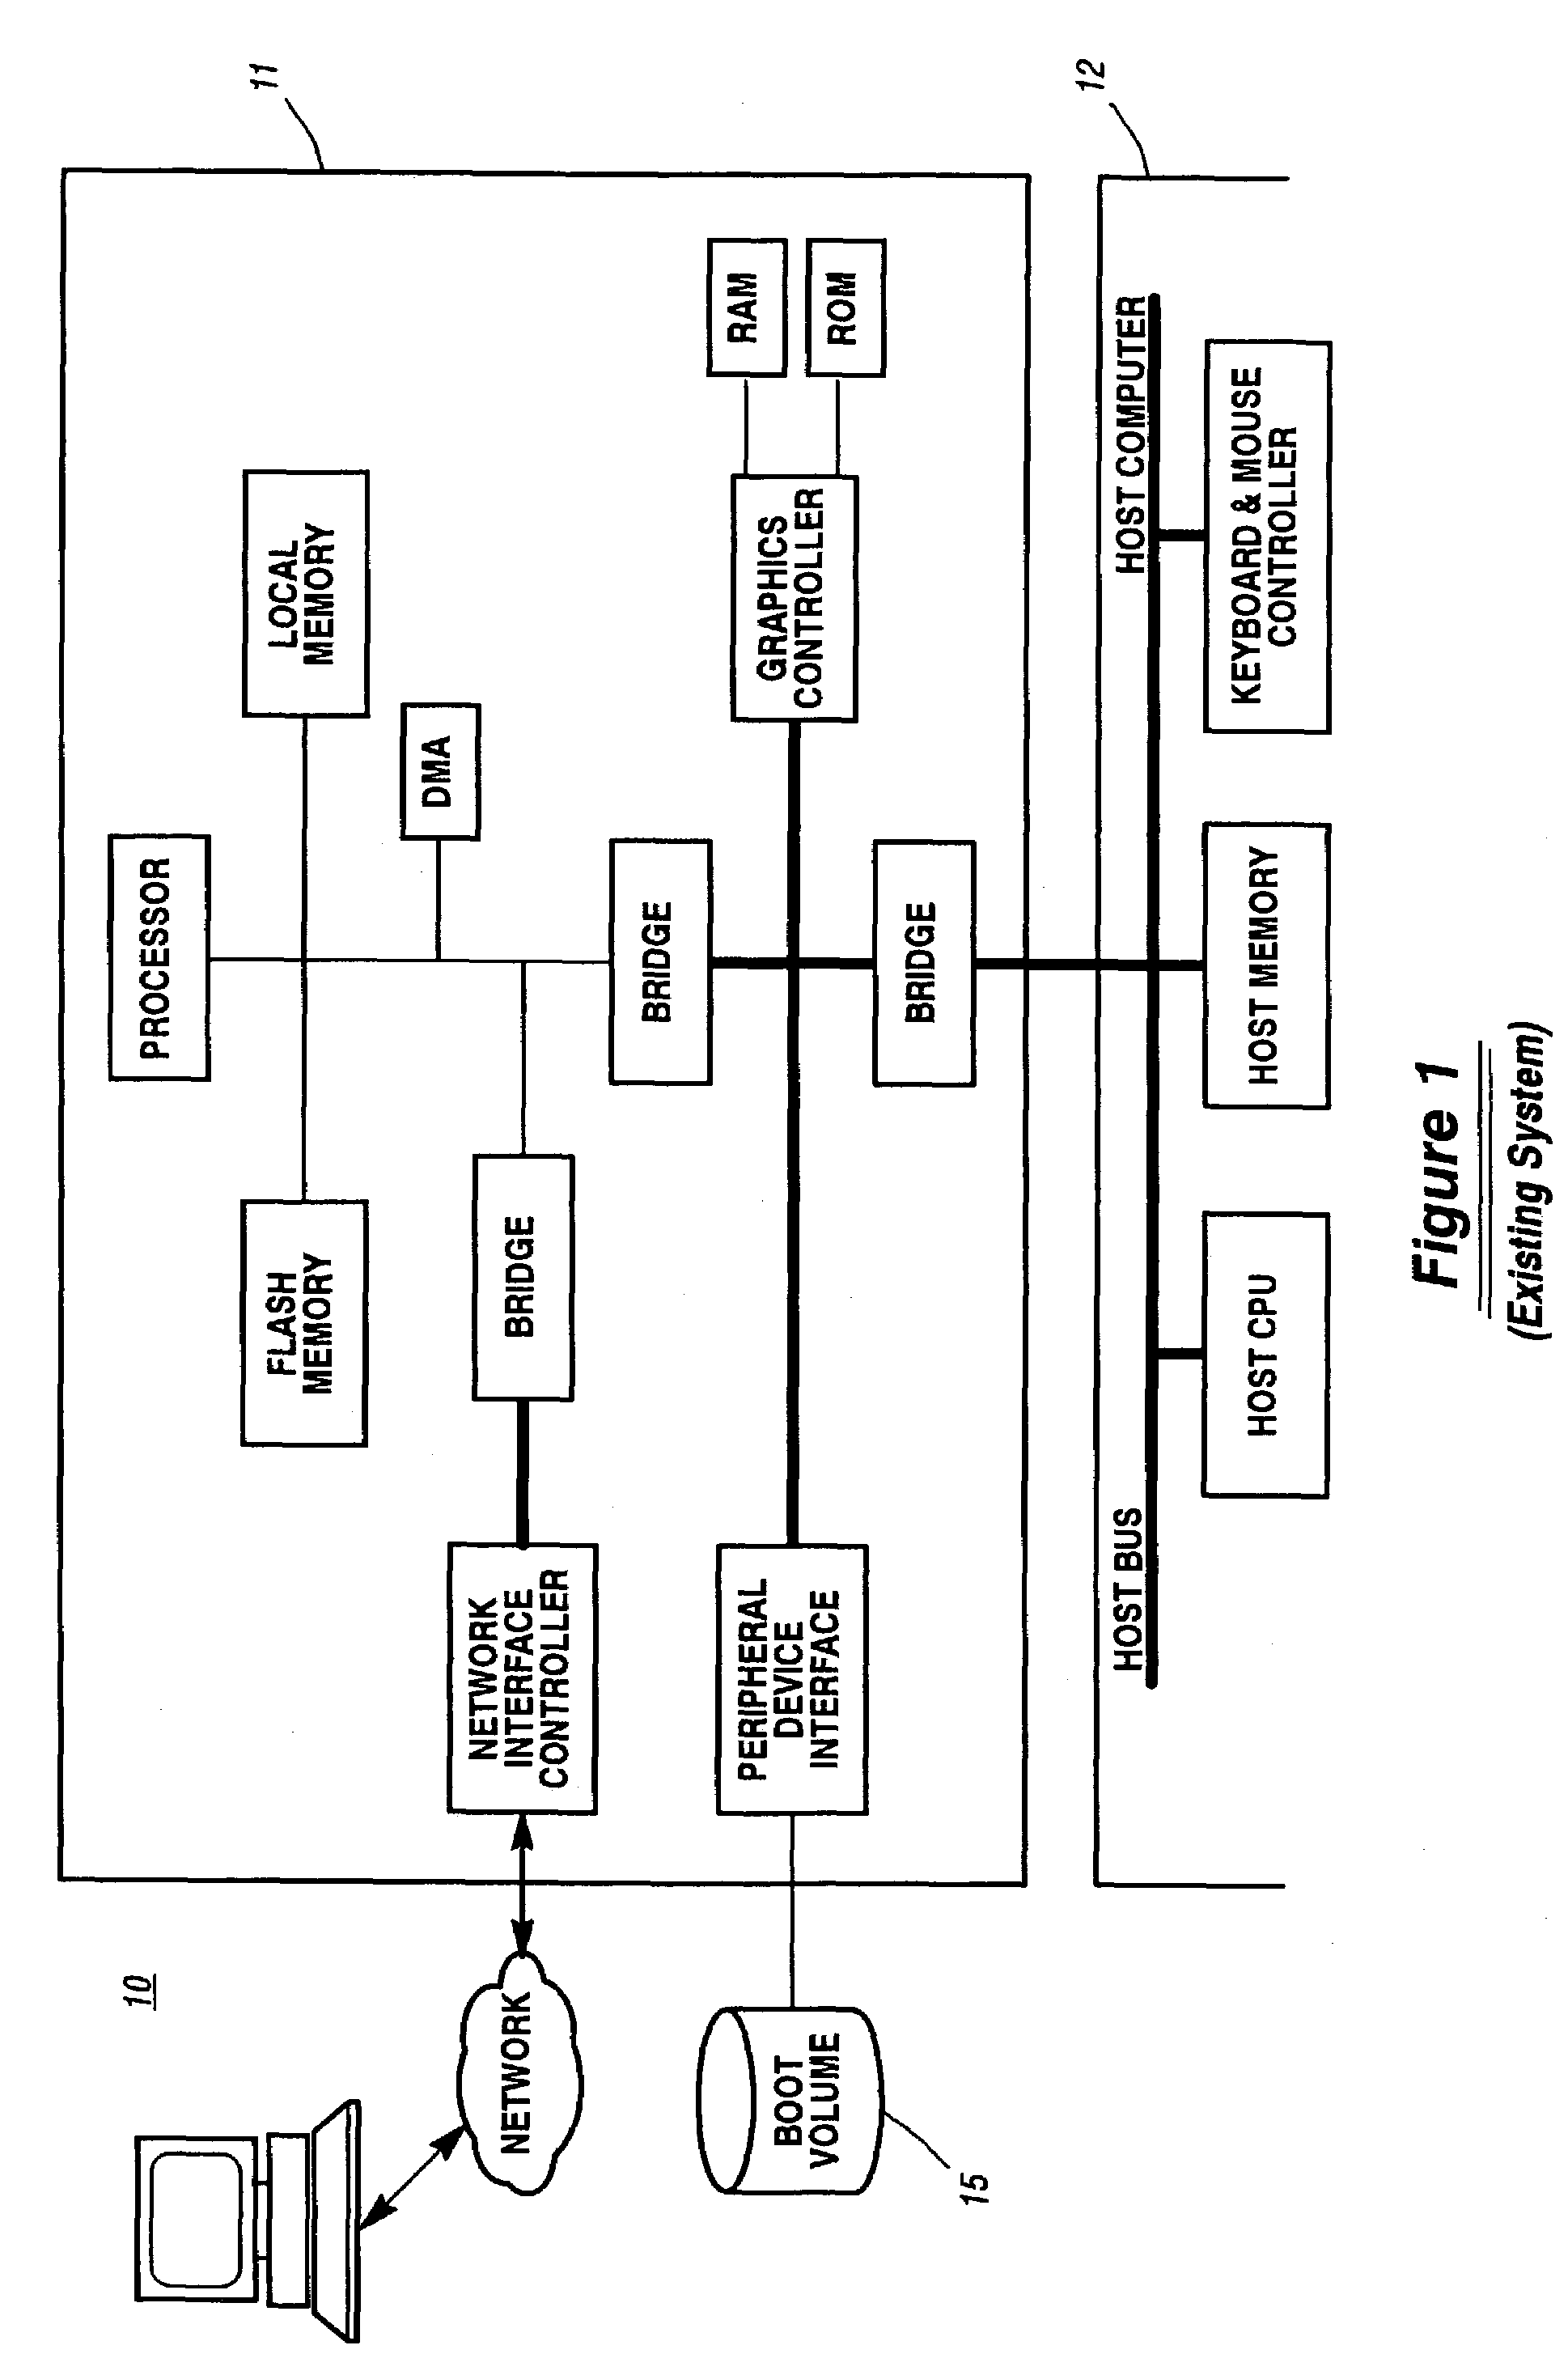 System for support of remote console by emulation of local console with multipath data flow structure